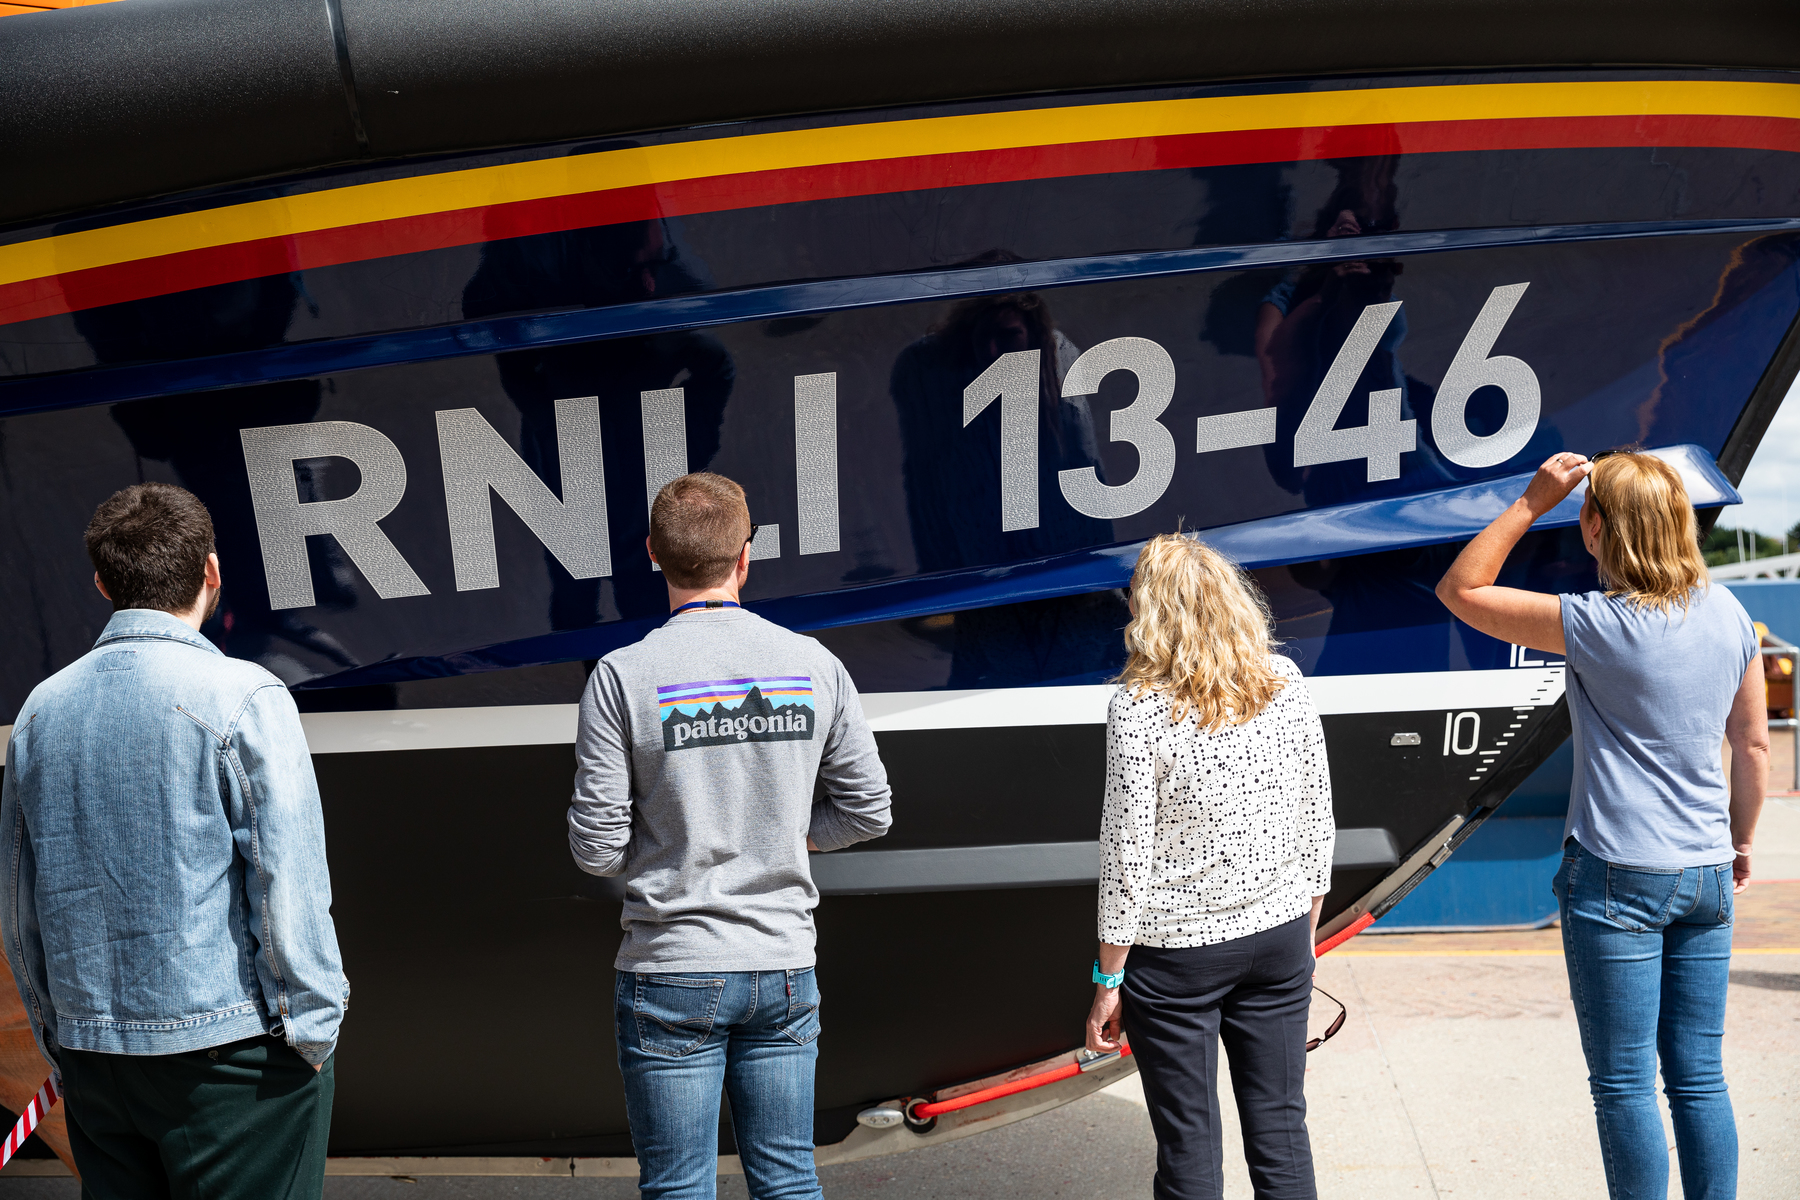 A first chance to see the Launch A Memory names within the decals on the hull and wheelhouse roof